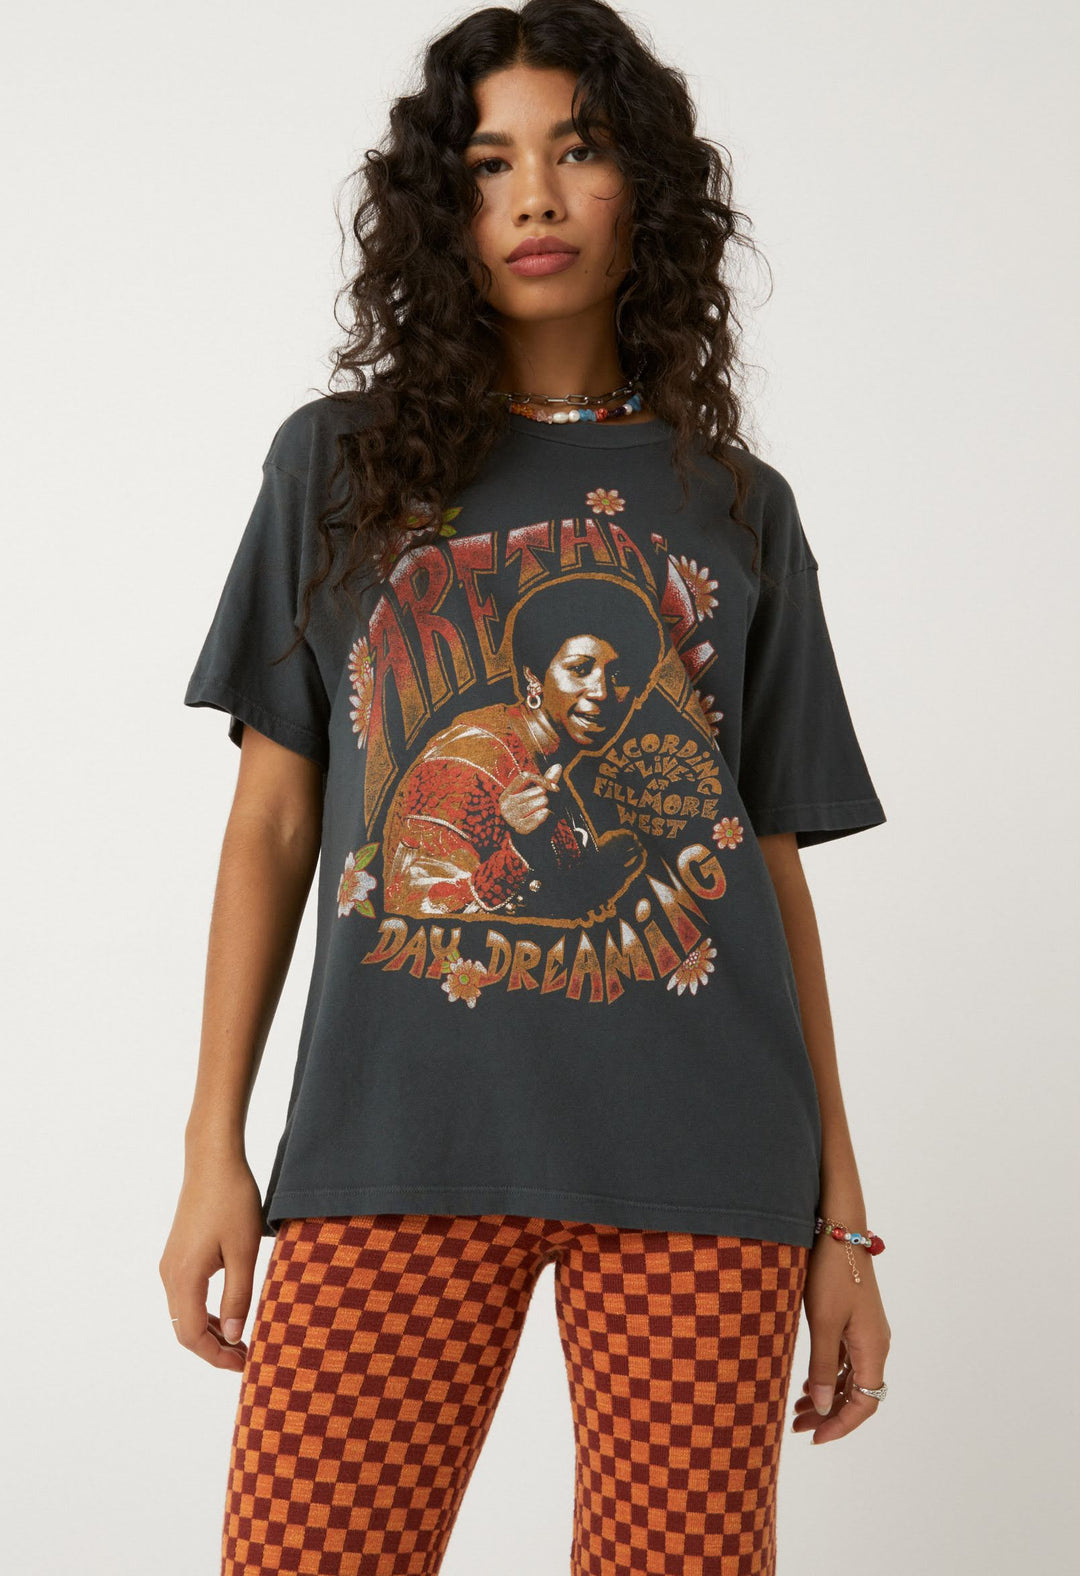 AERTHA FRANKLIN DAYDREAMING  TEE - Kingfisher Road - Online Boutique